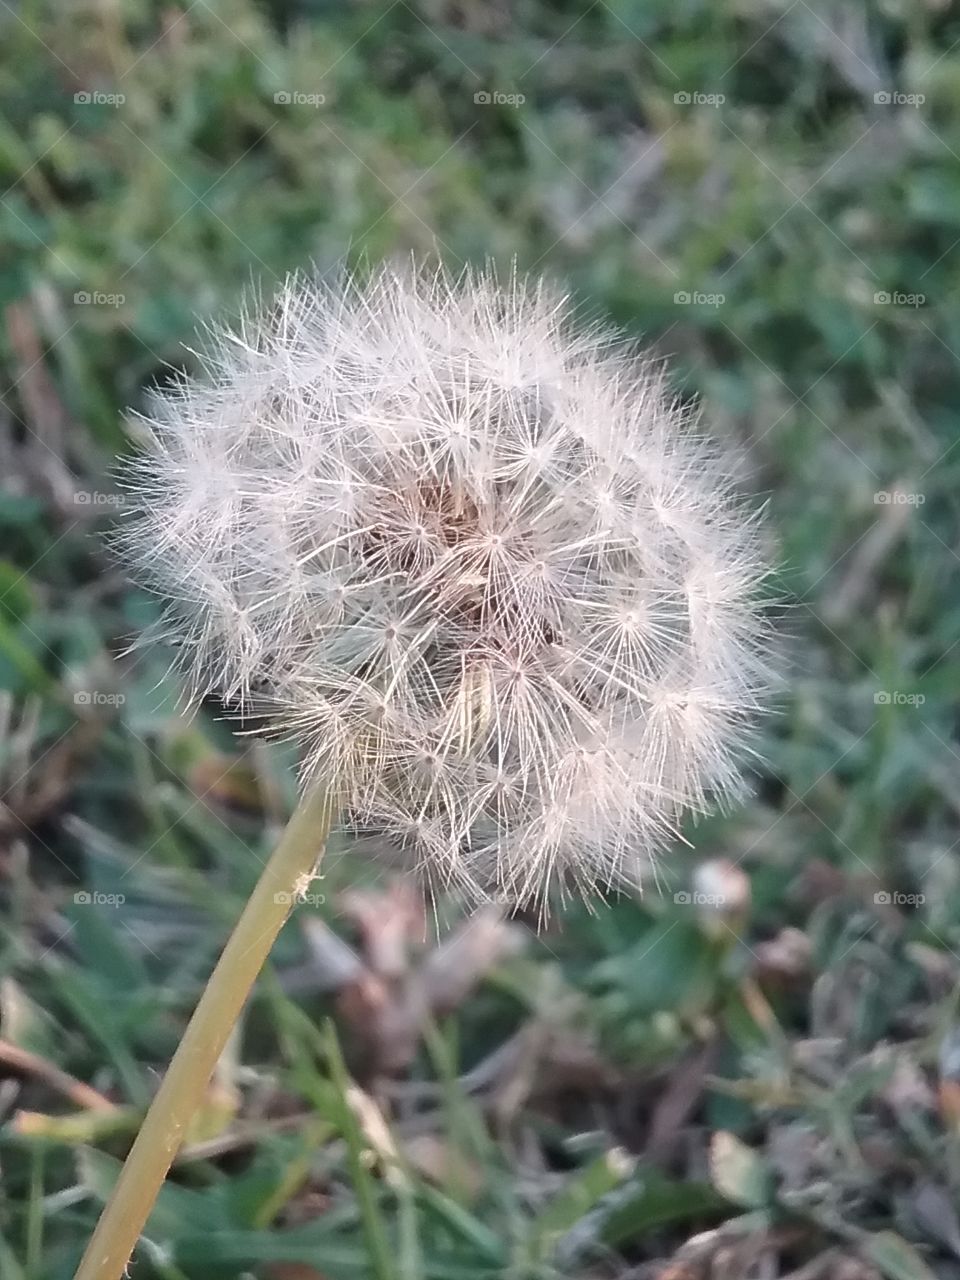 Dandelions in my front yard in the late afternoon.